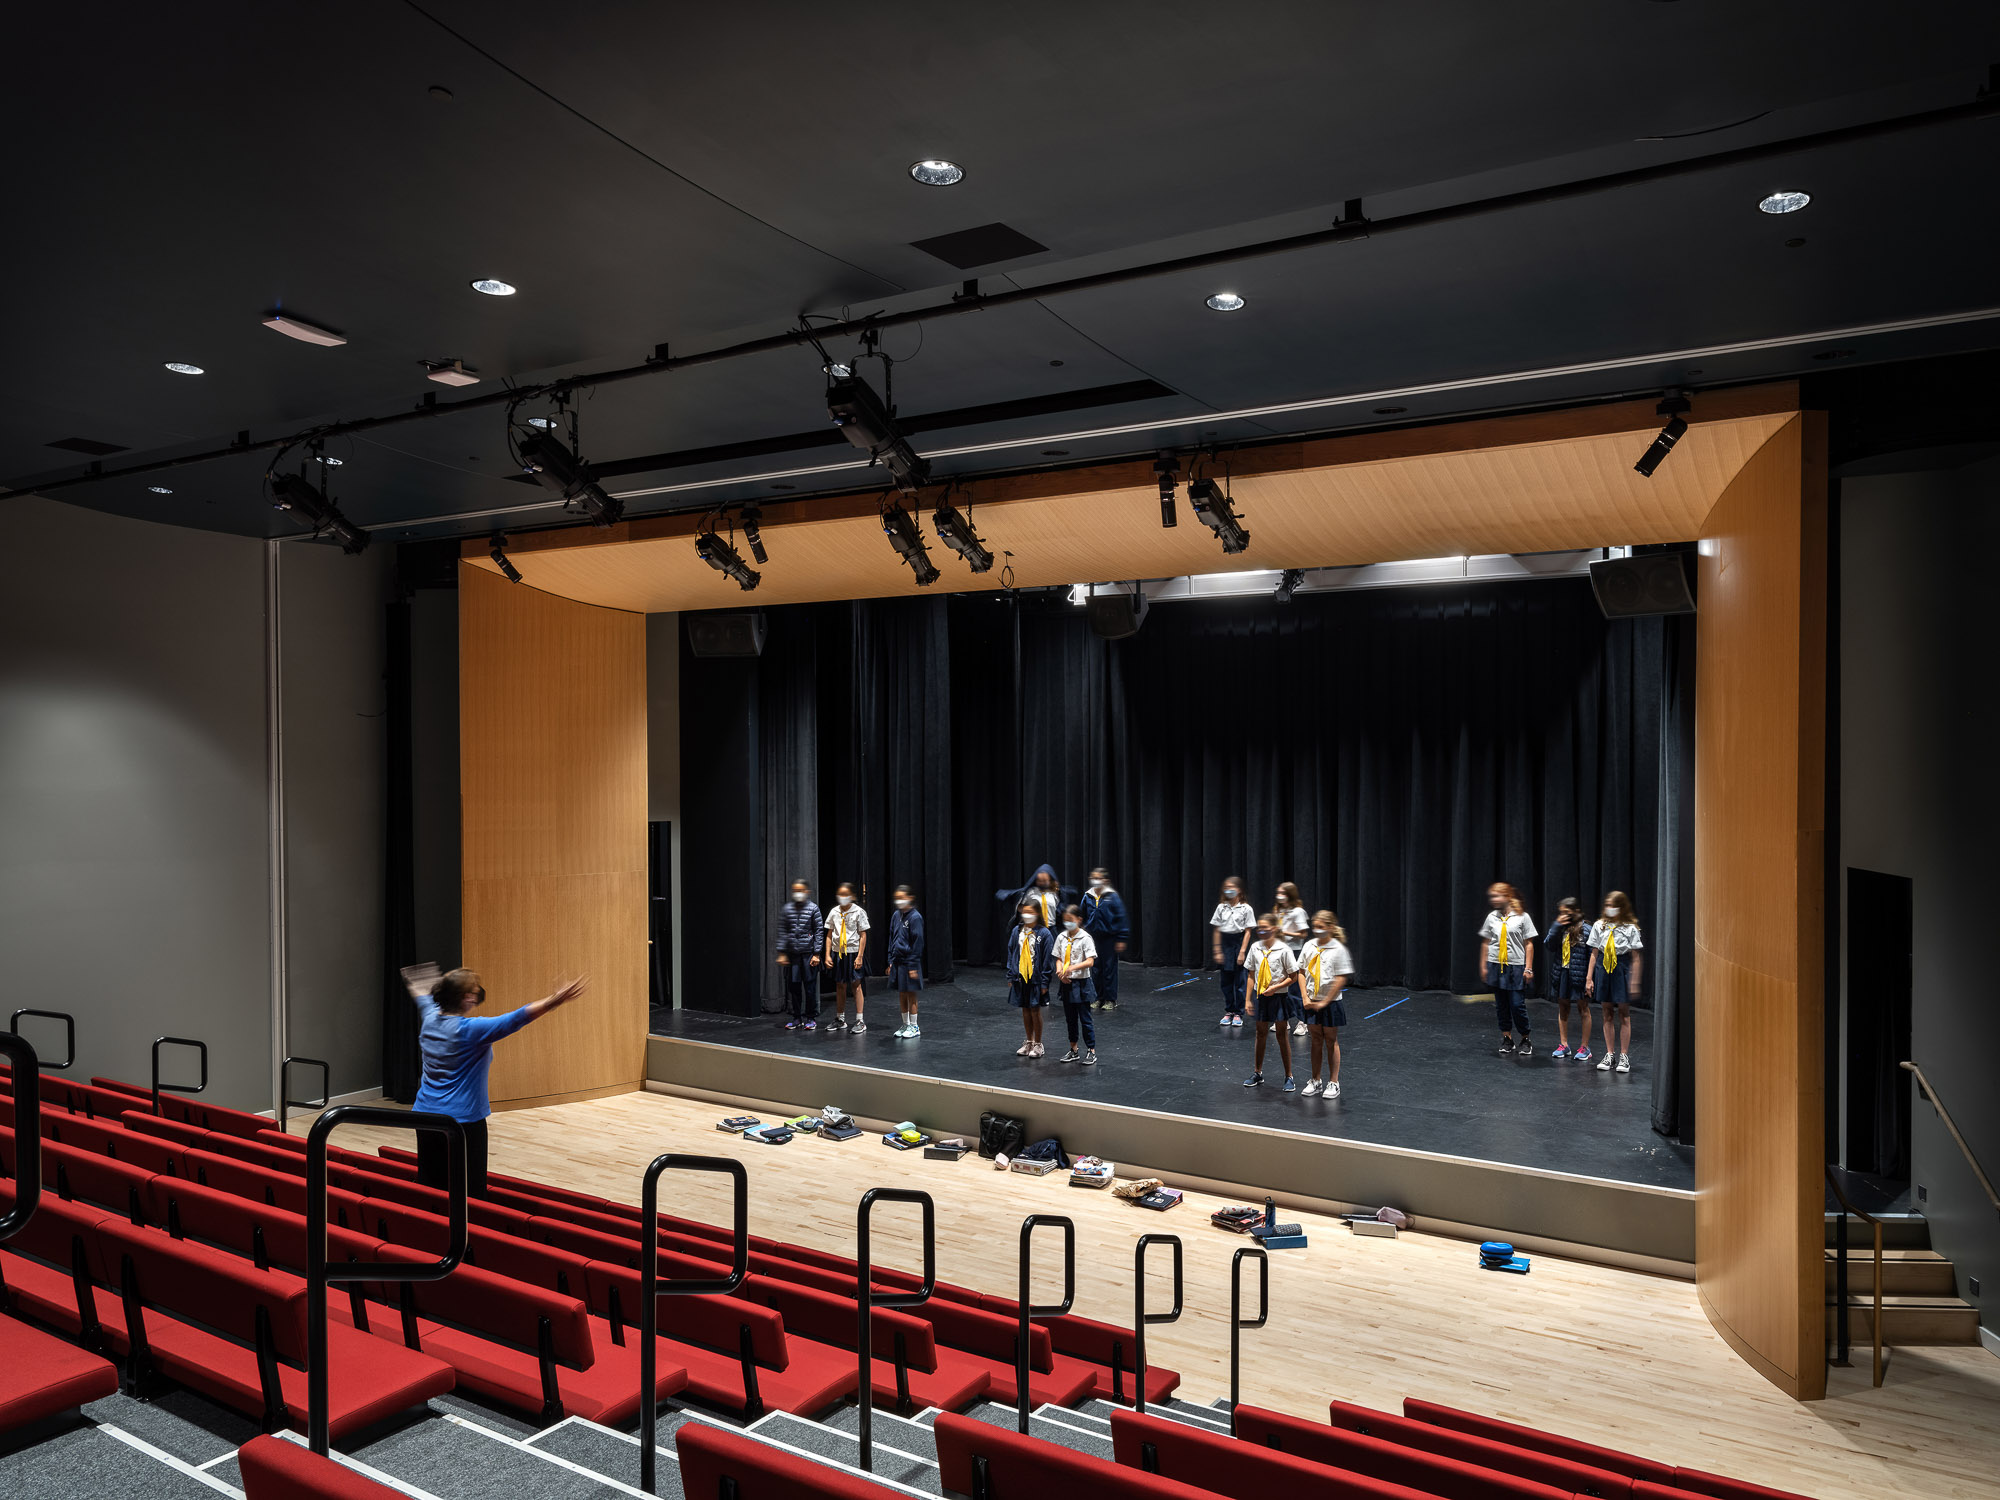 The Hamlin School, San Francisco, California ©Mike Kelley. The telescopic seating unit, with benches for flexibility, provides excellent sightlines to the raised stage during performances.